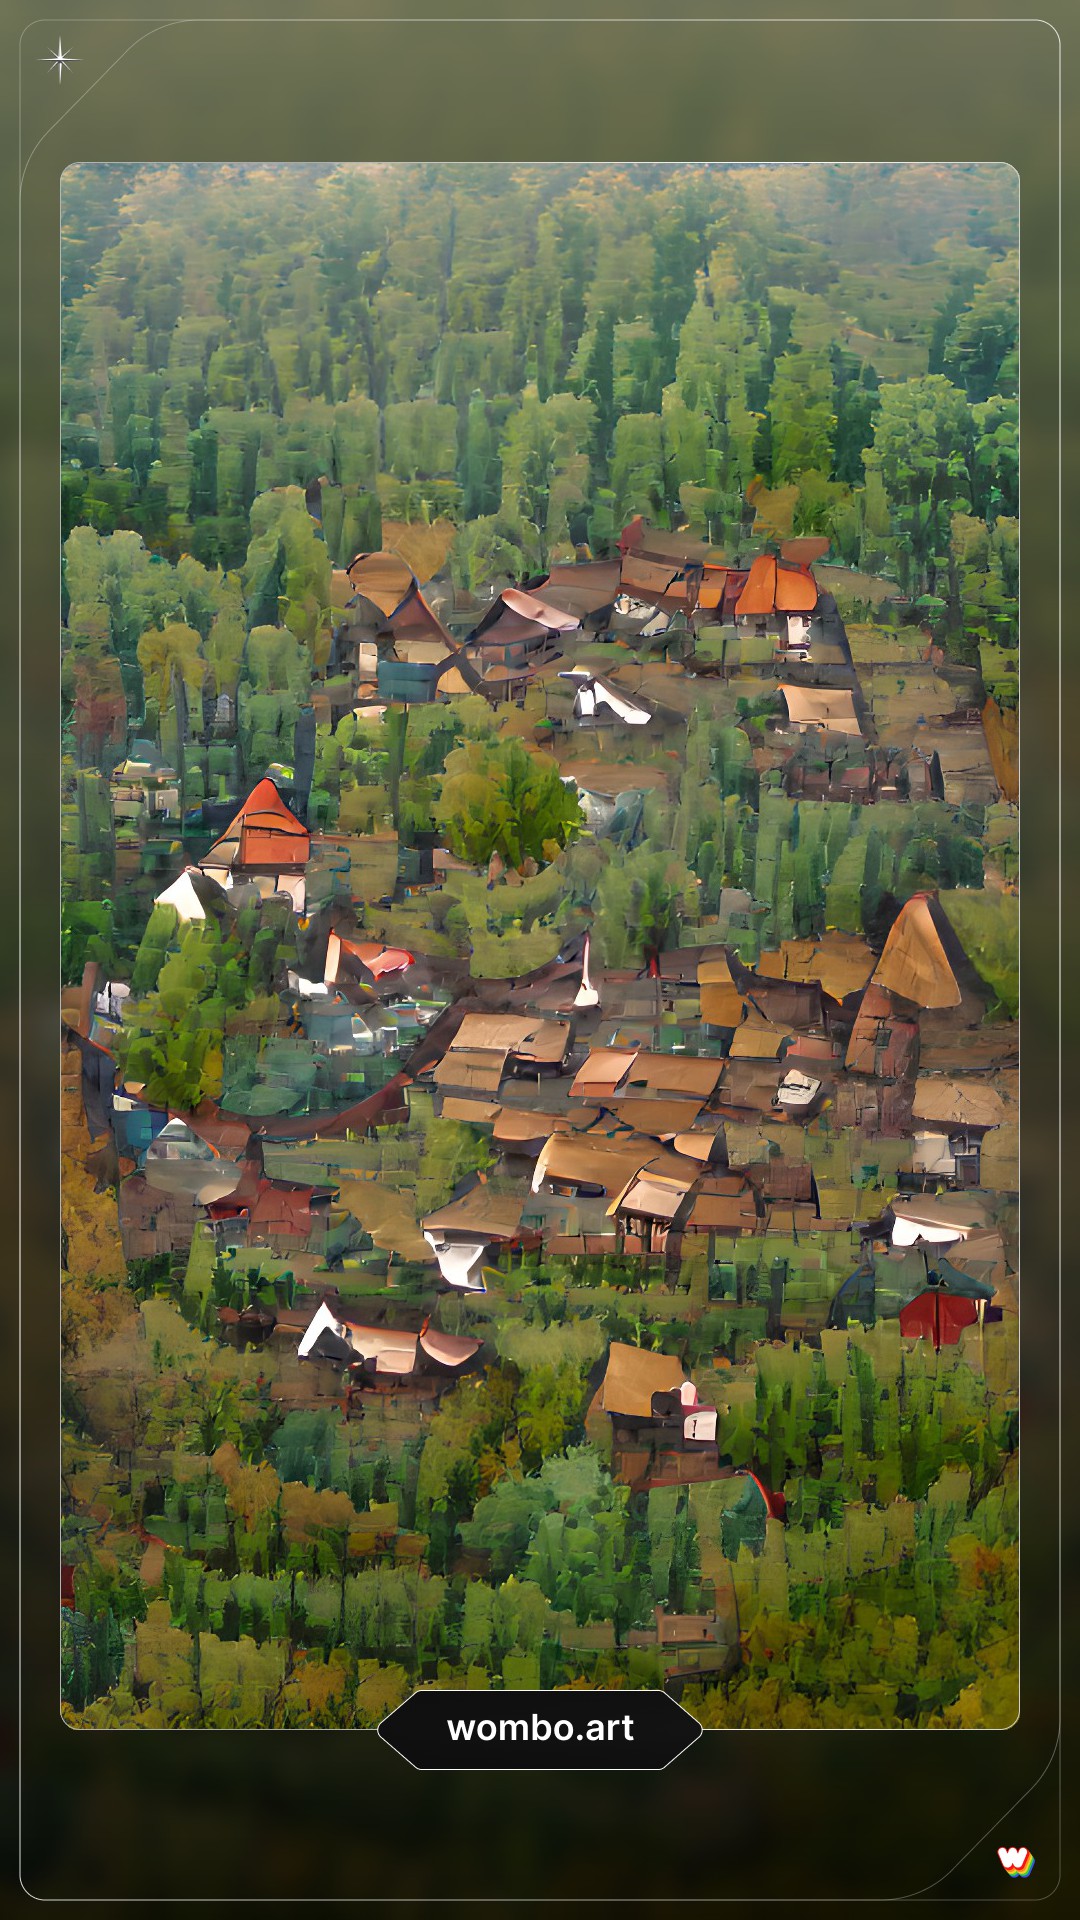 A small village in the forest